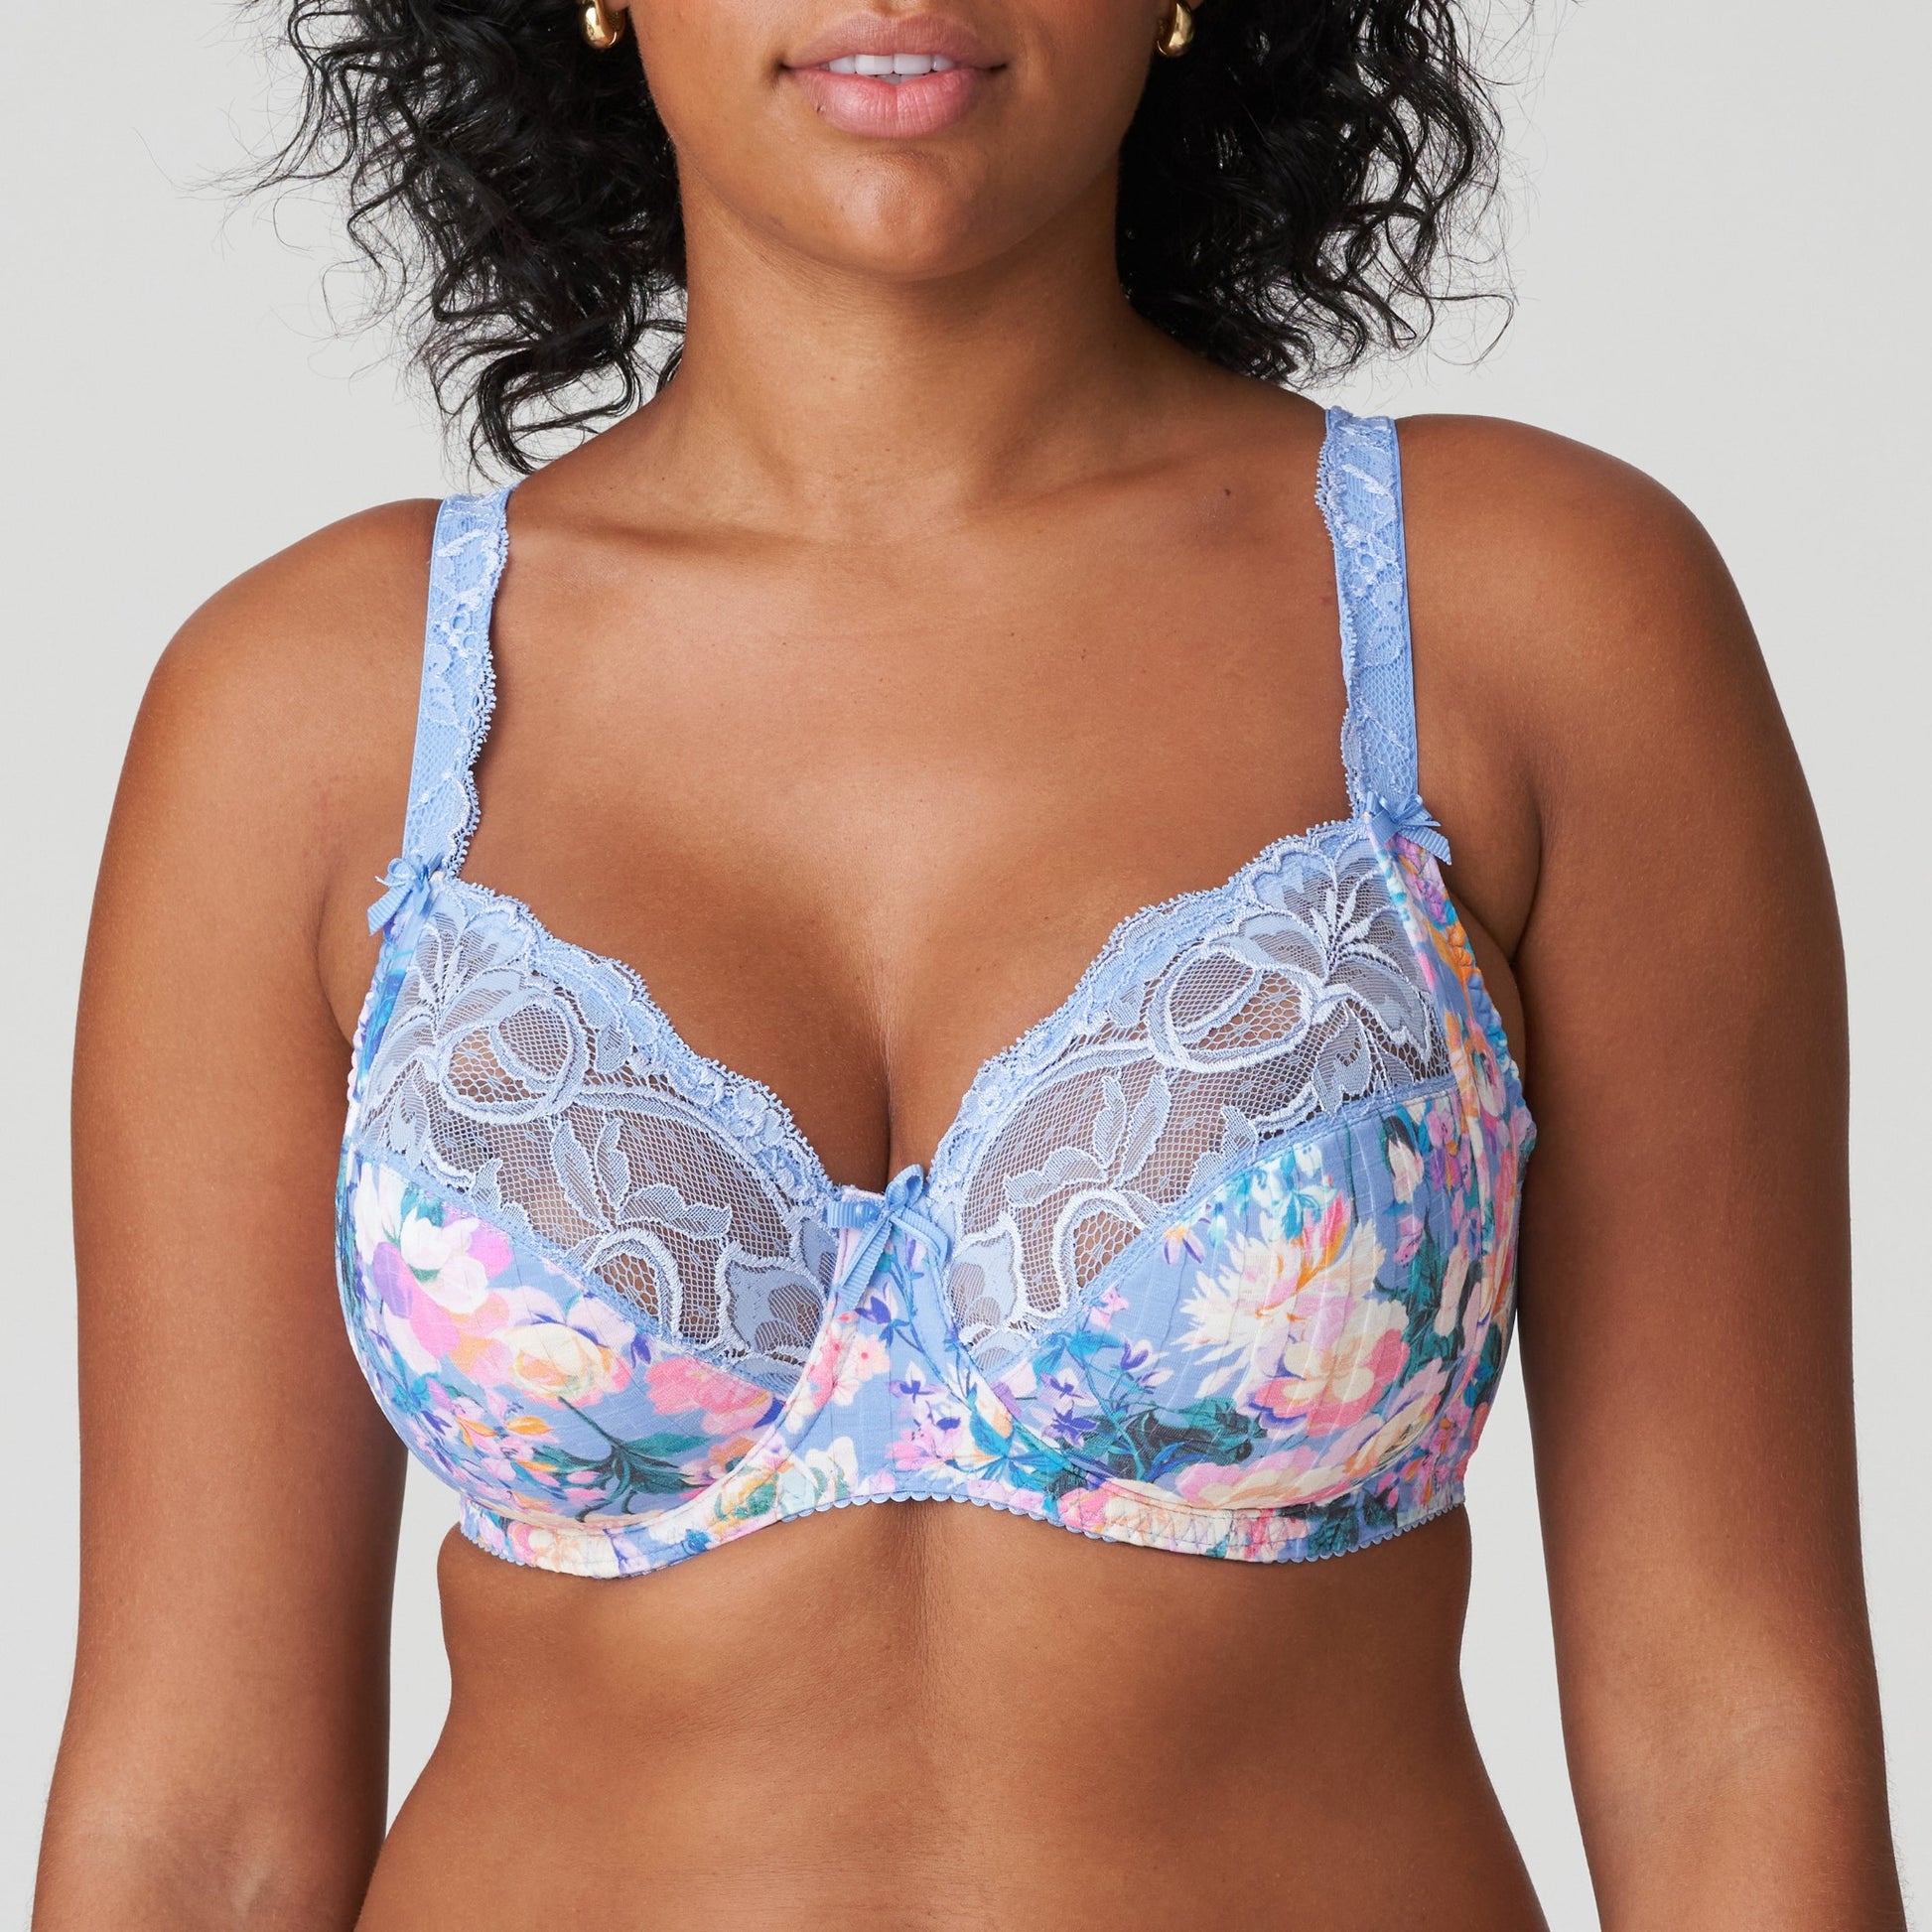 Front view of a woman wearing the DD+ Madison Full Cup Bra in Periwinkle Floral by PrimaDonna.